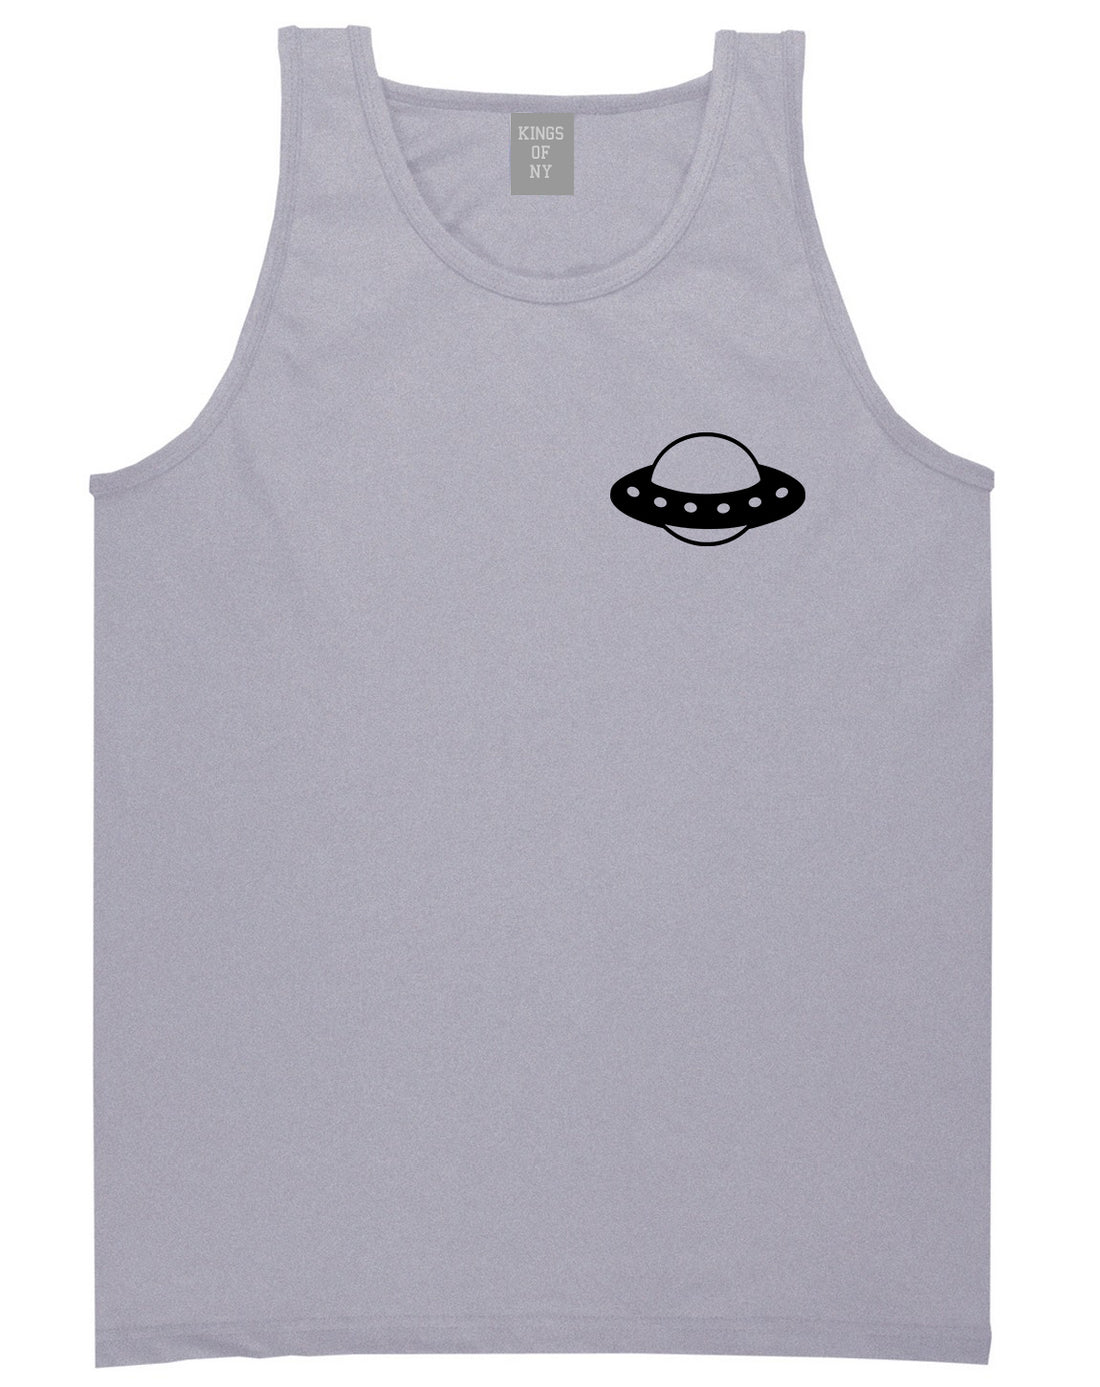 Spaceship_Chest Mens Grey Tank Top Shirt by Kings Of NY